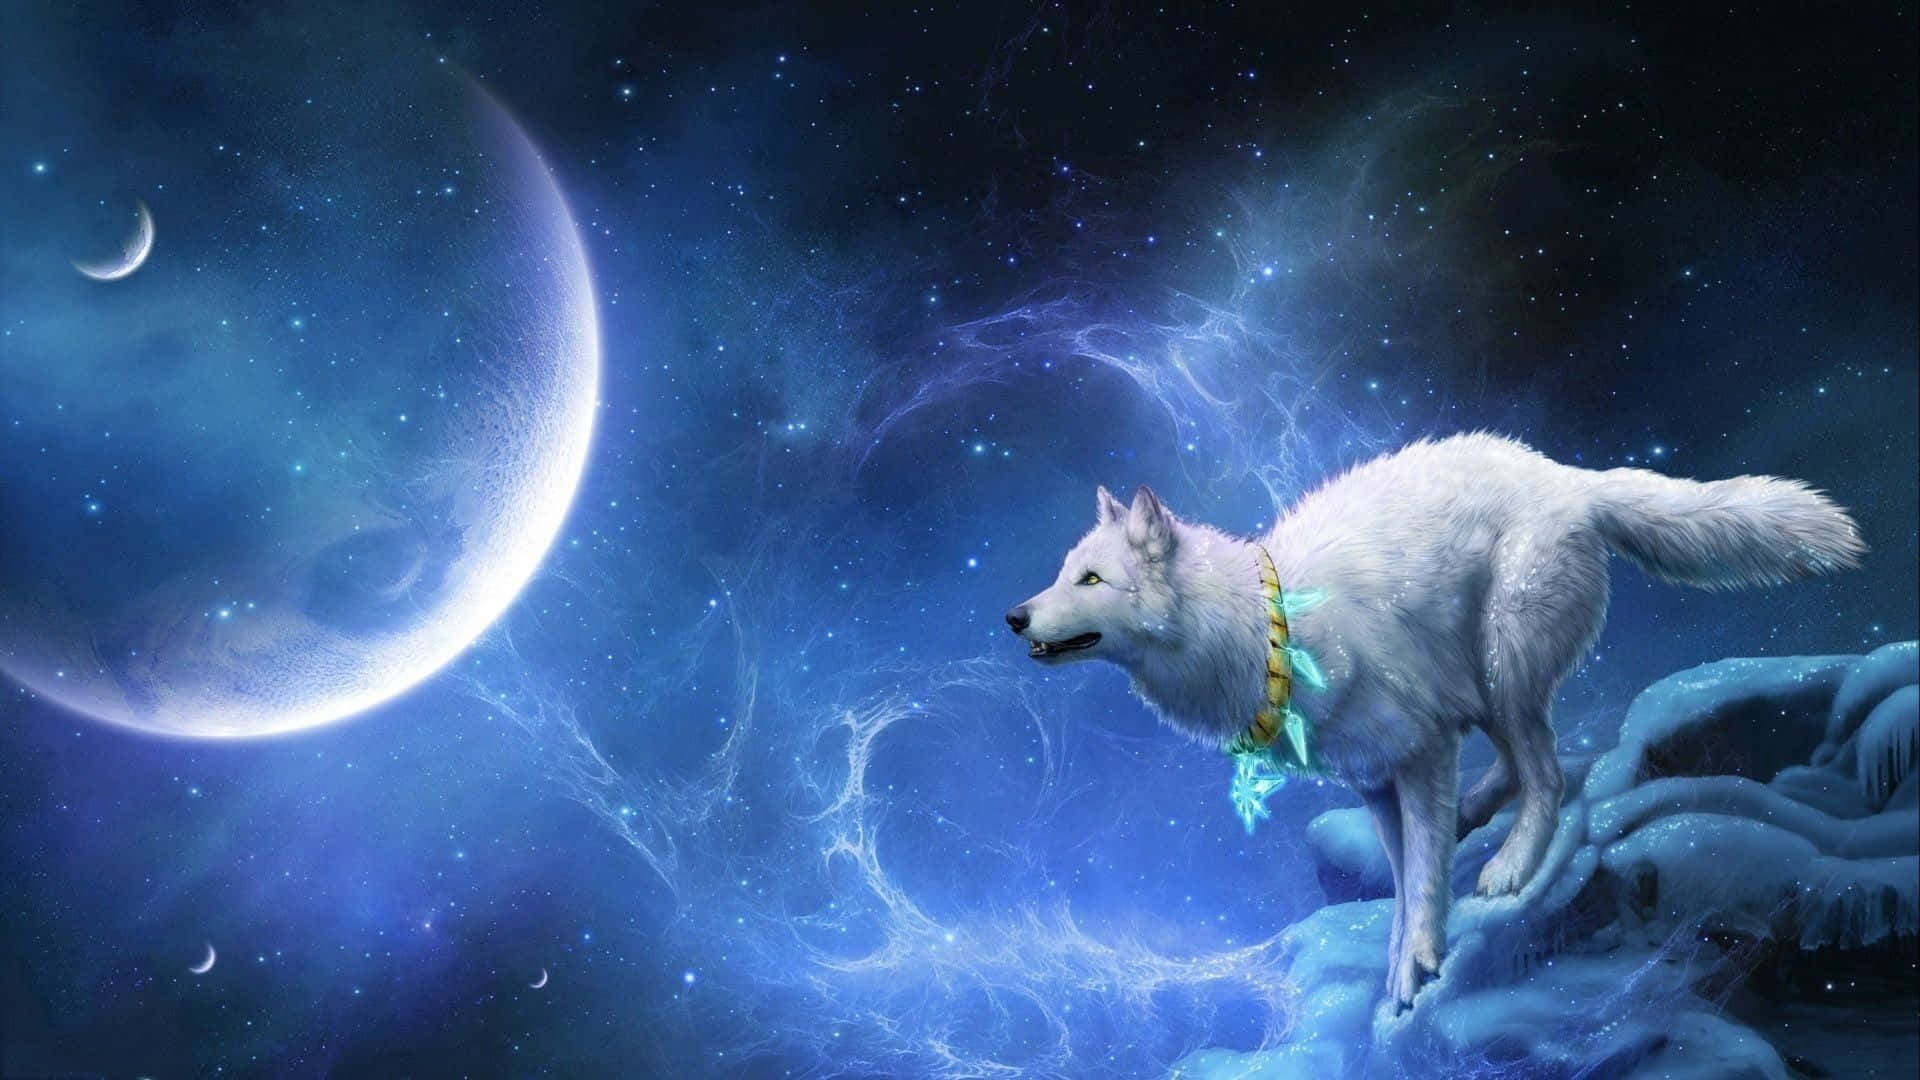 Majestic Howling Wolf Under a Full Moon Wallpaper